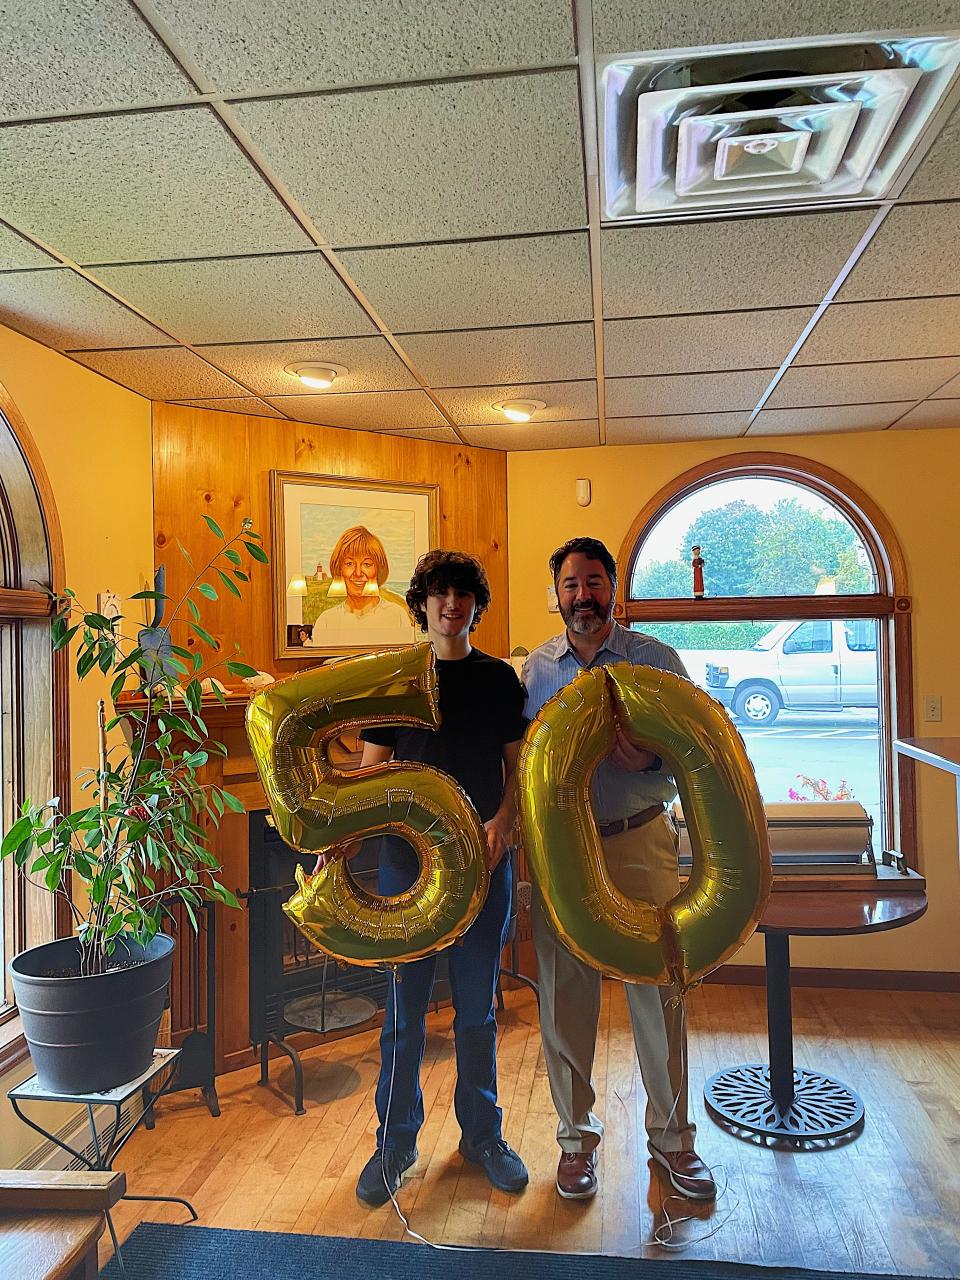 Symeon's Greek Restaurant owner Symeon Tsoupelis and his son, also named Symeon, pose with balloons commemorating the restaurants 50th anniversary, with a painting of the older Symeon's mother behind them.